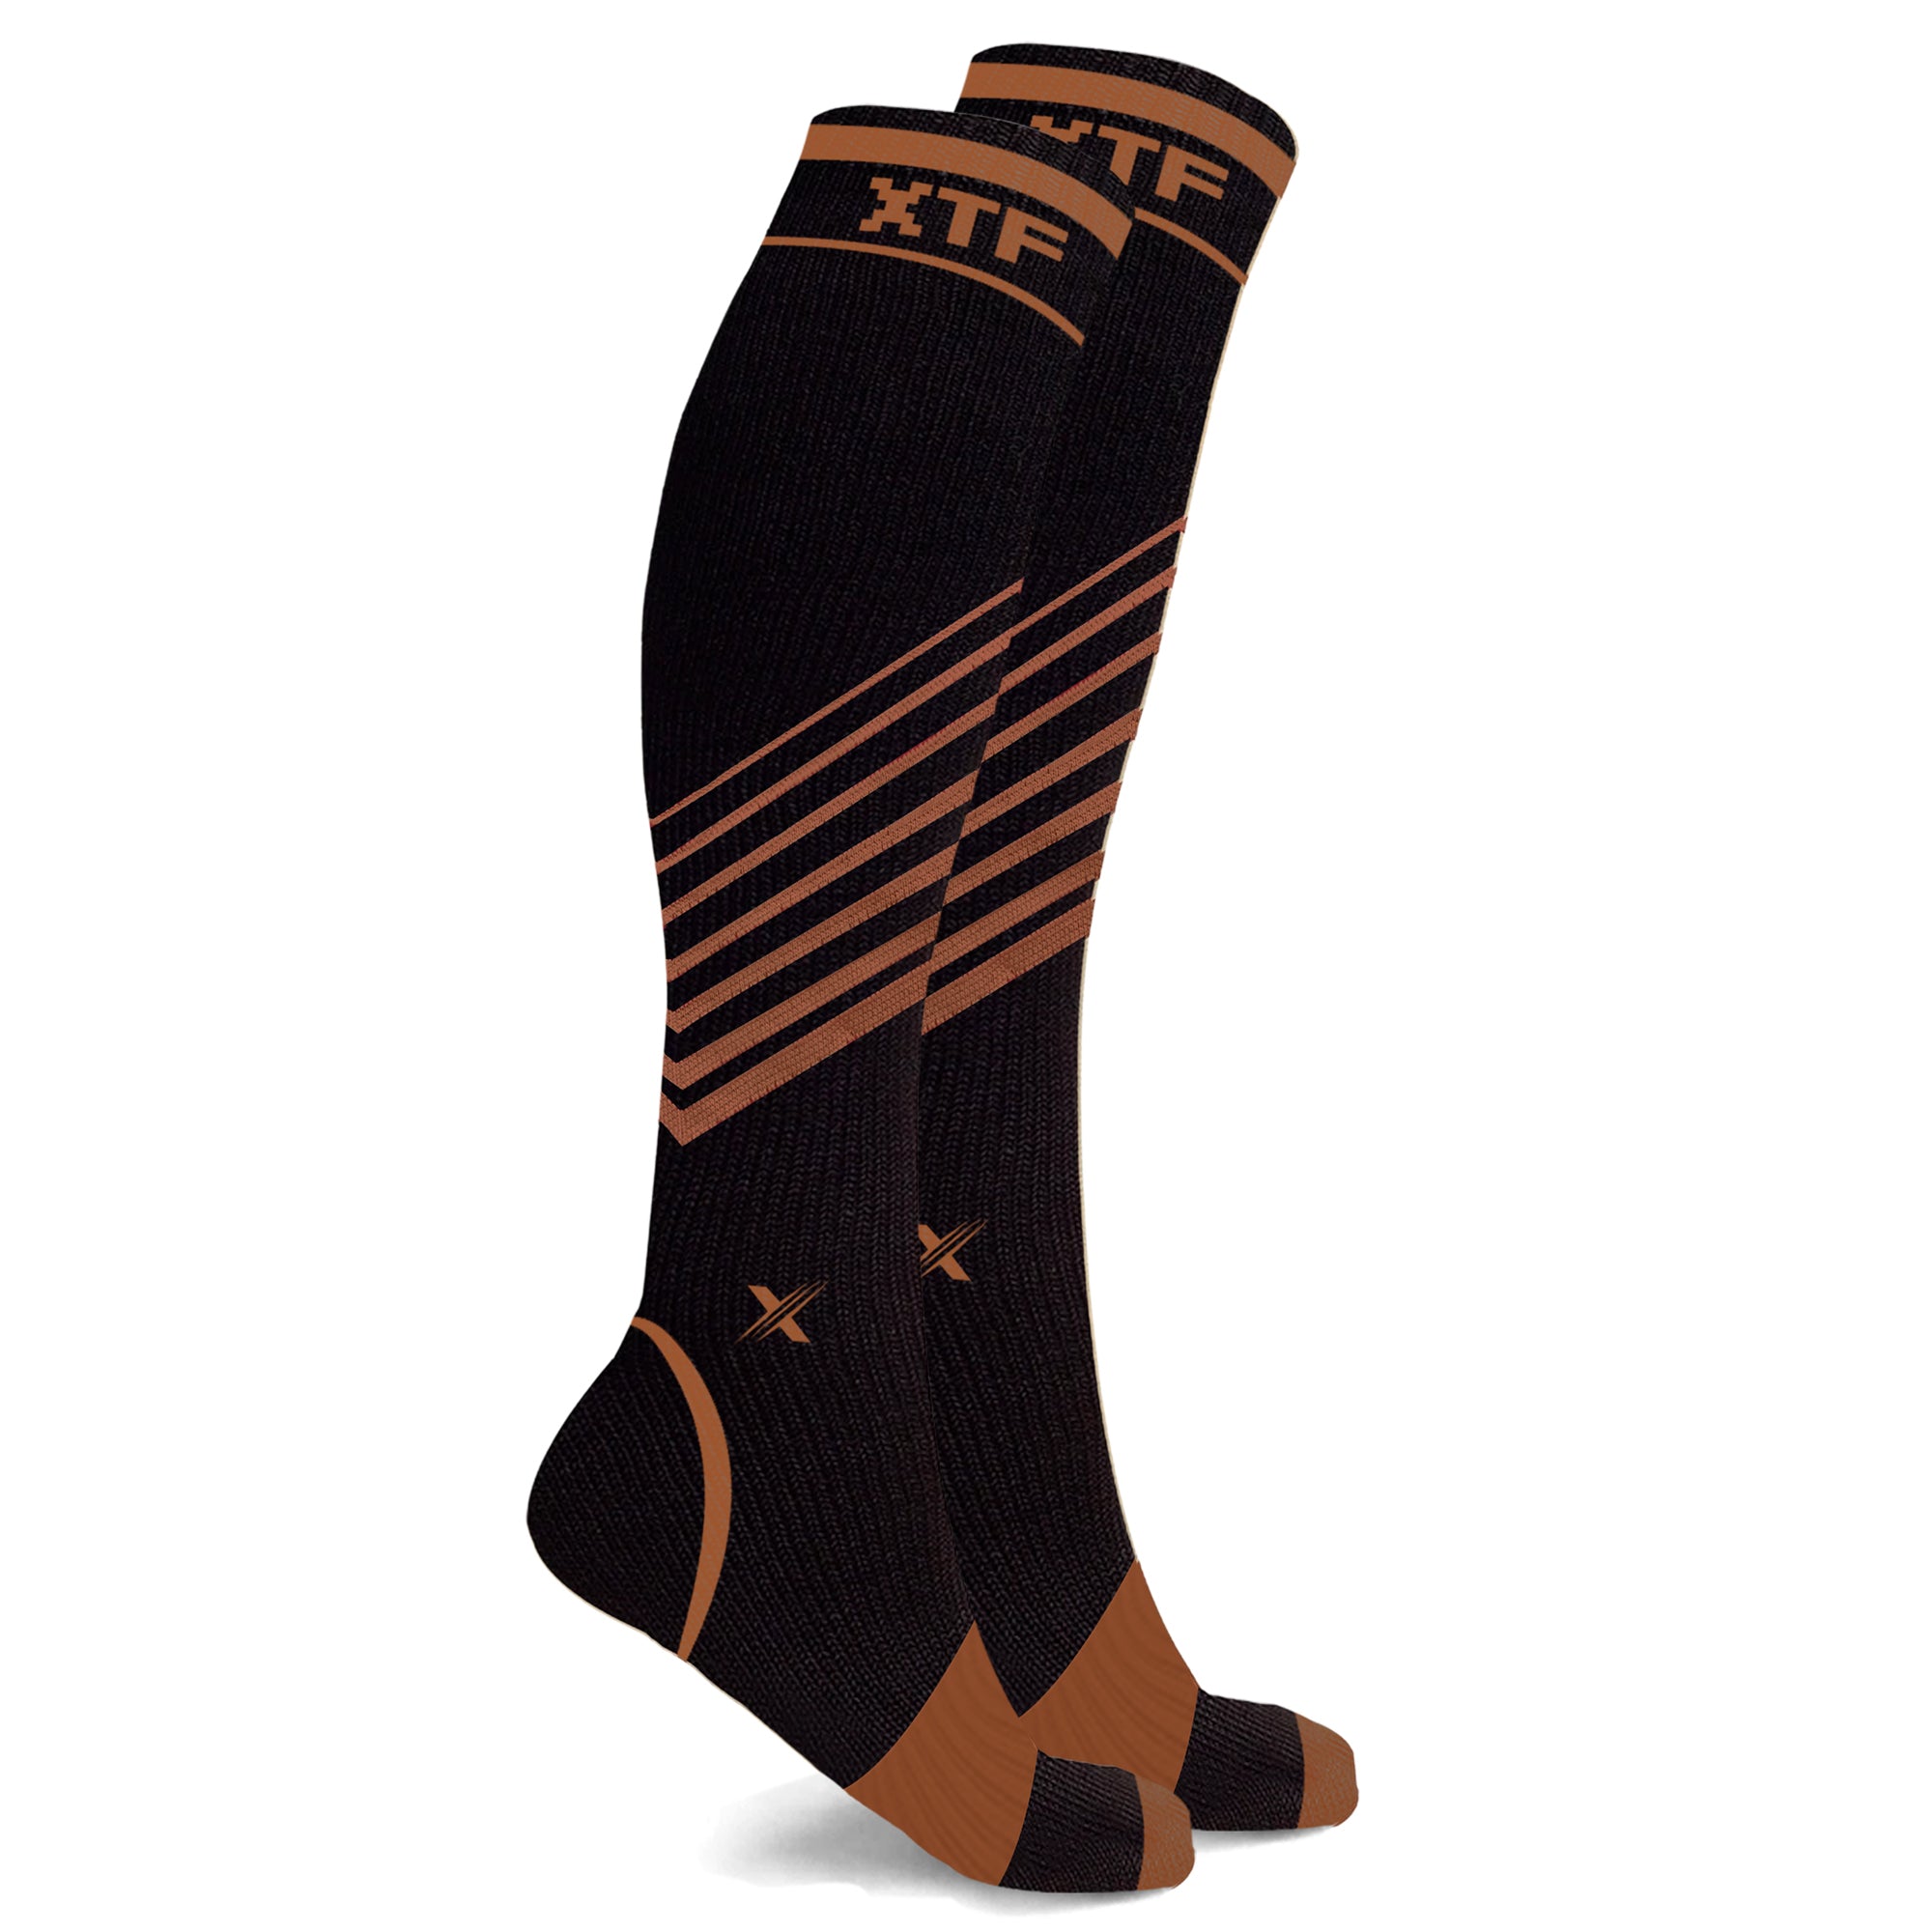 COPPER COMPRESSION STRIPED KNEE-HIGH SOCKS | Extreme Fit